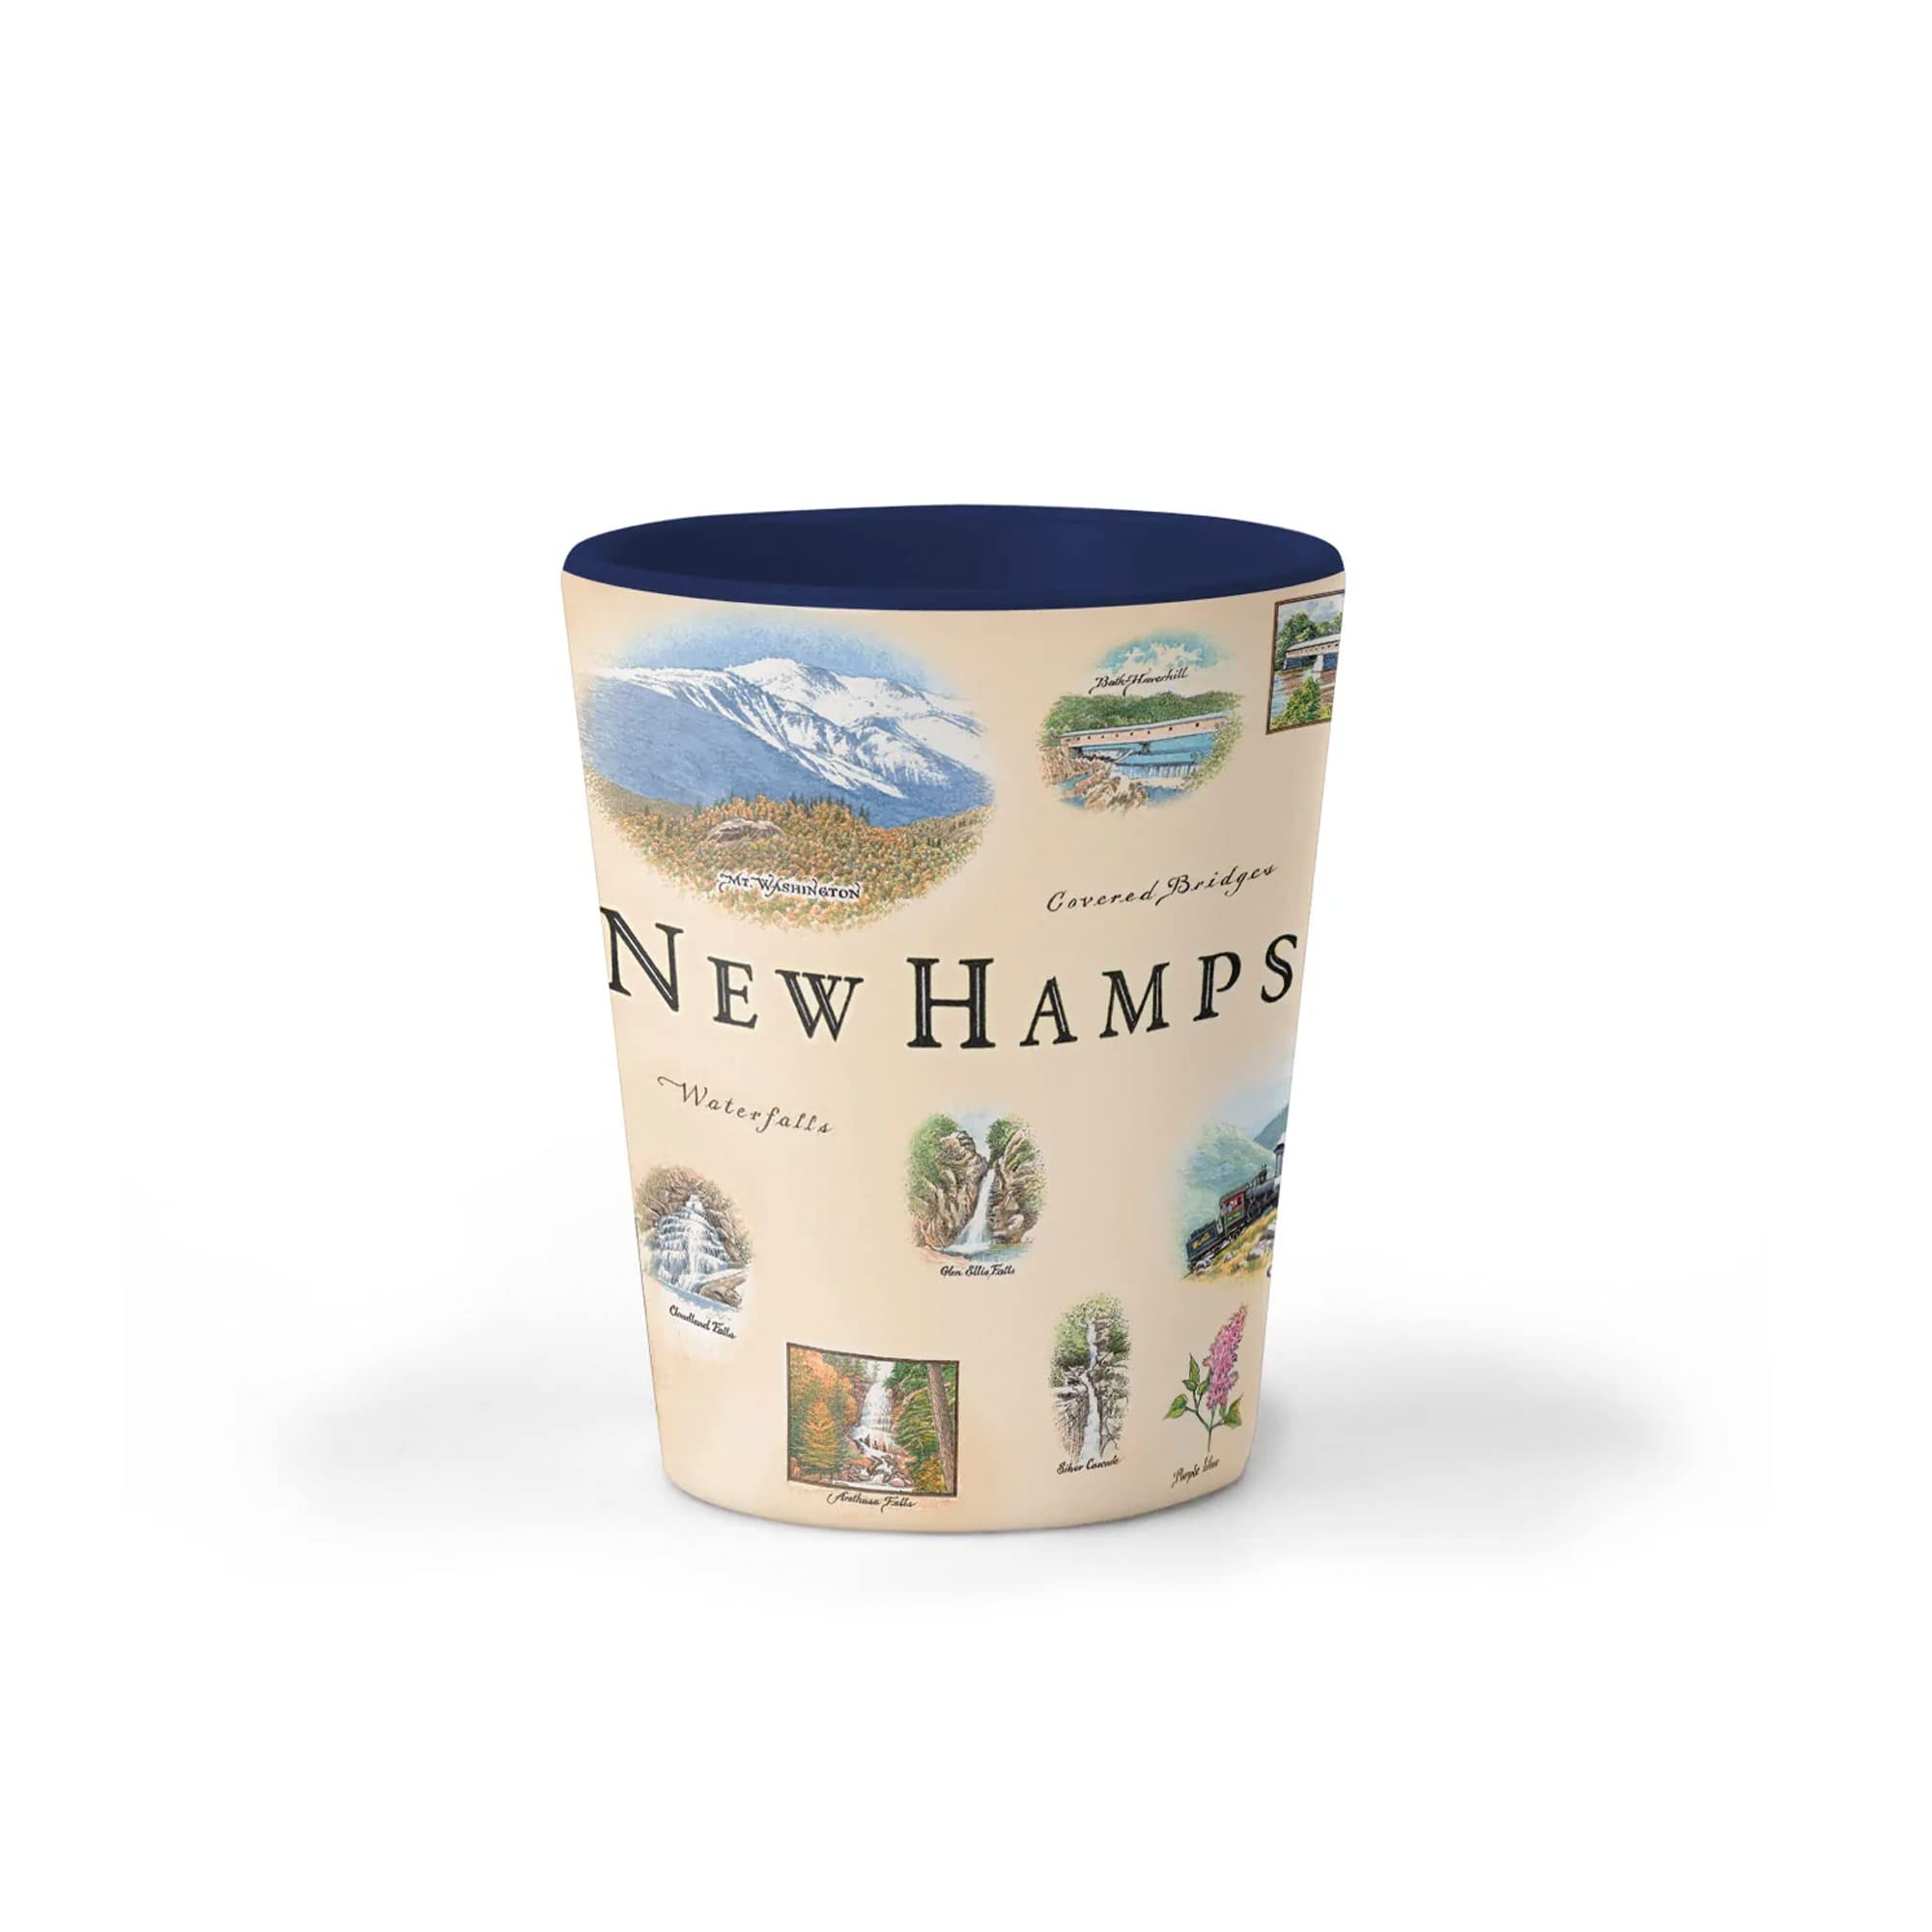 Xplorer Maps New Hampshire State Map Ceramic Shot Glass, BPA-Free - For Office, Home, Gift, Party - Durable and holds 1.5 oz Liquid